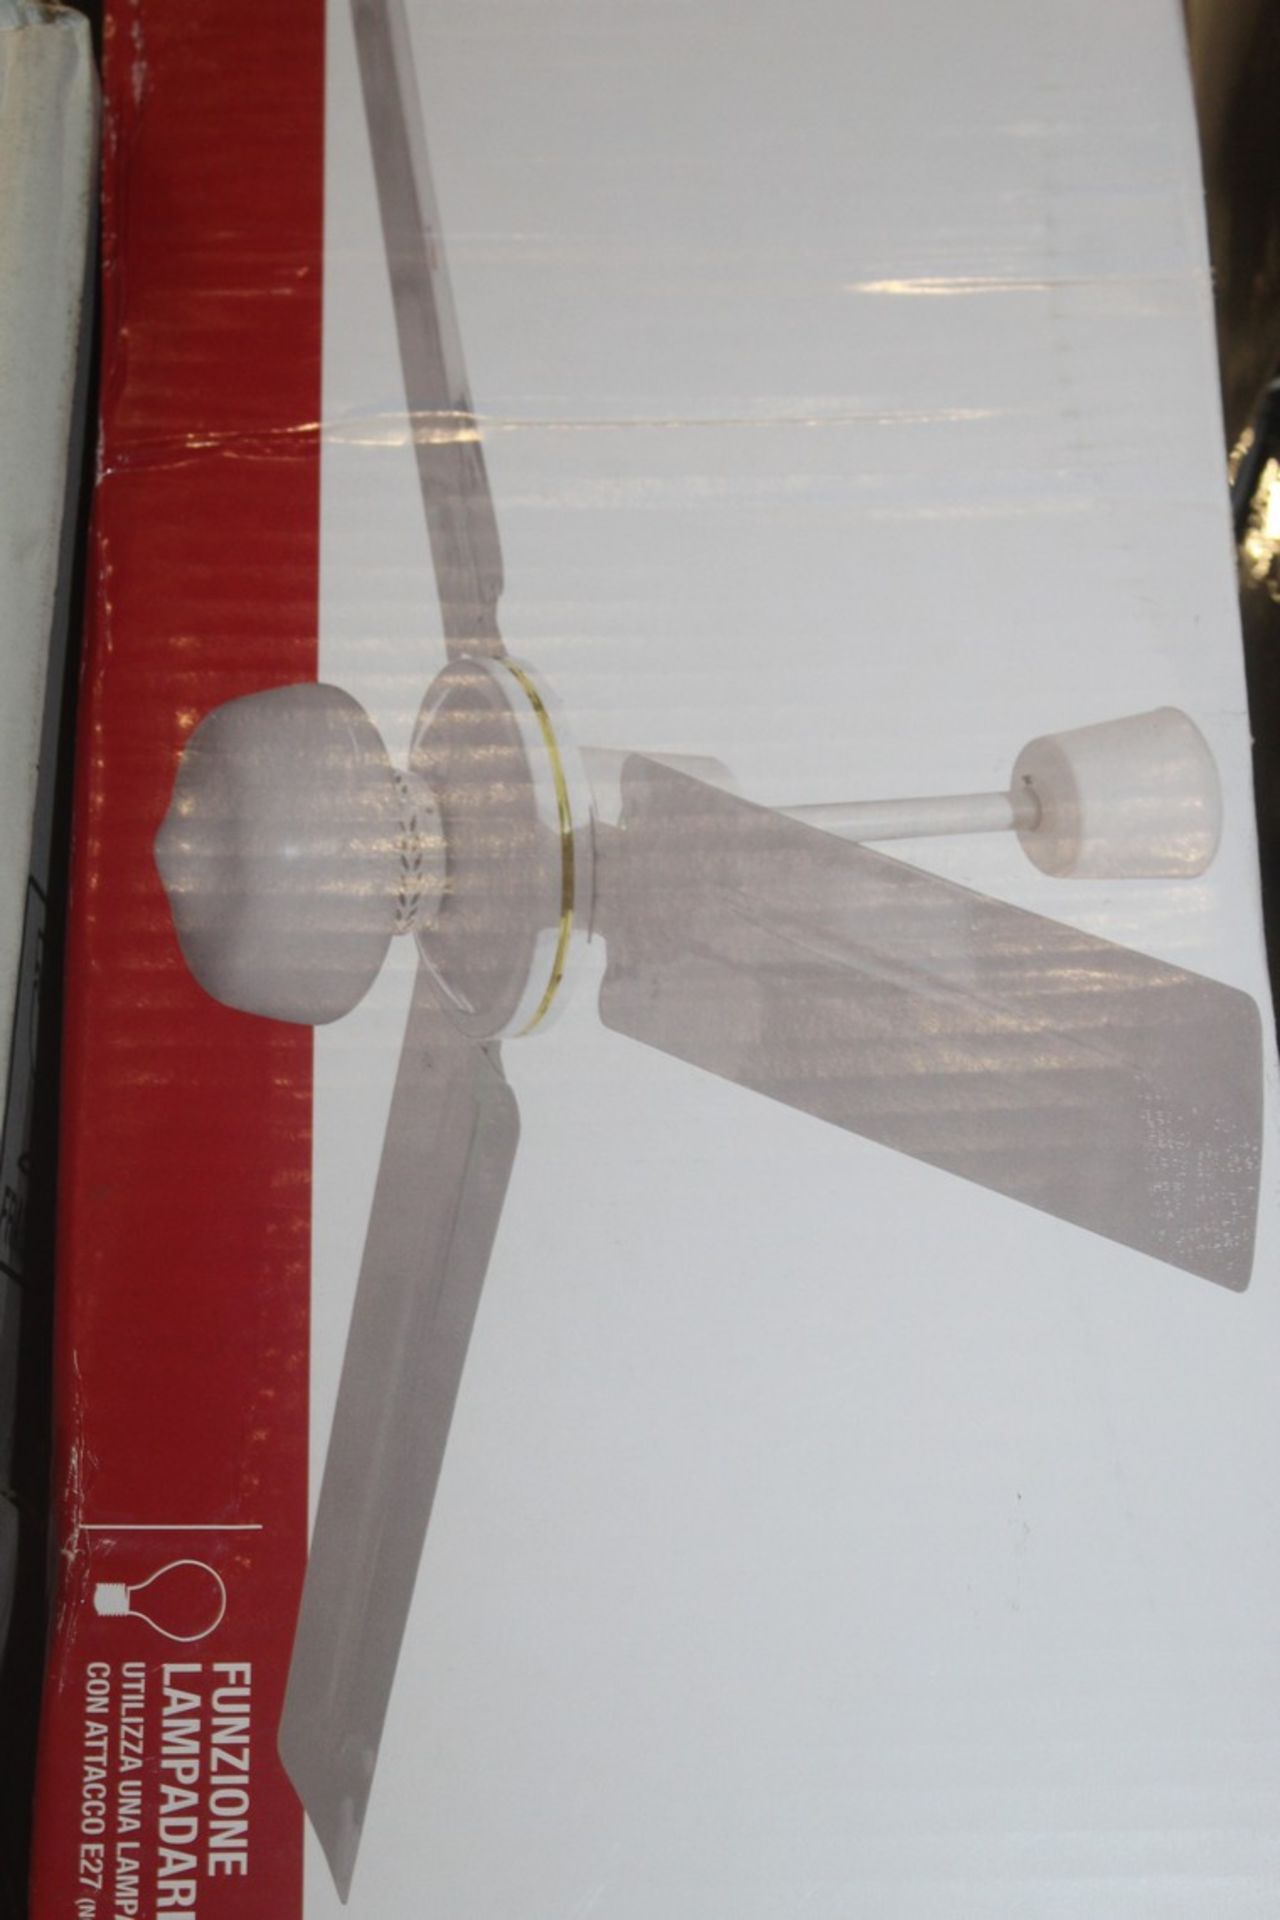 Boxed Kooper Windy Ventilator Ceiling Fan RRP £80 (16838) (Pictures Are For Illustration Purposes